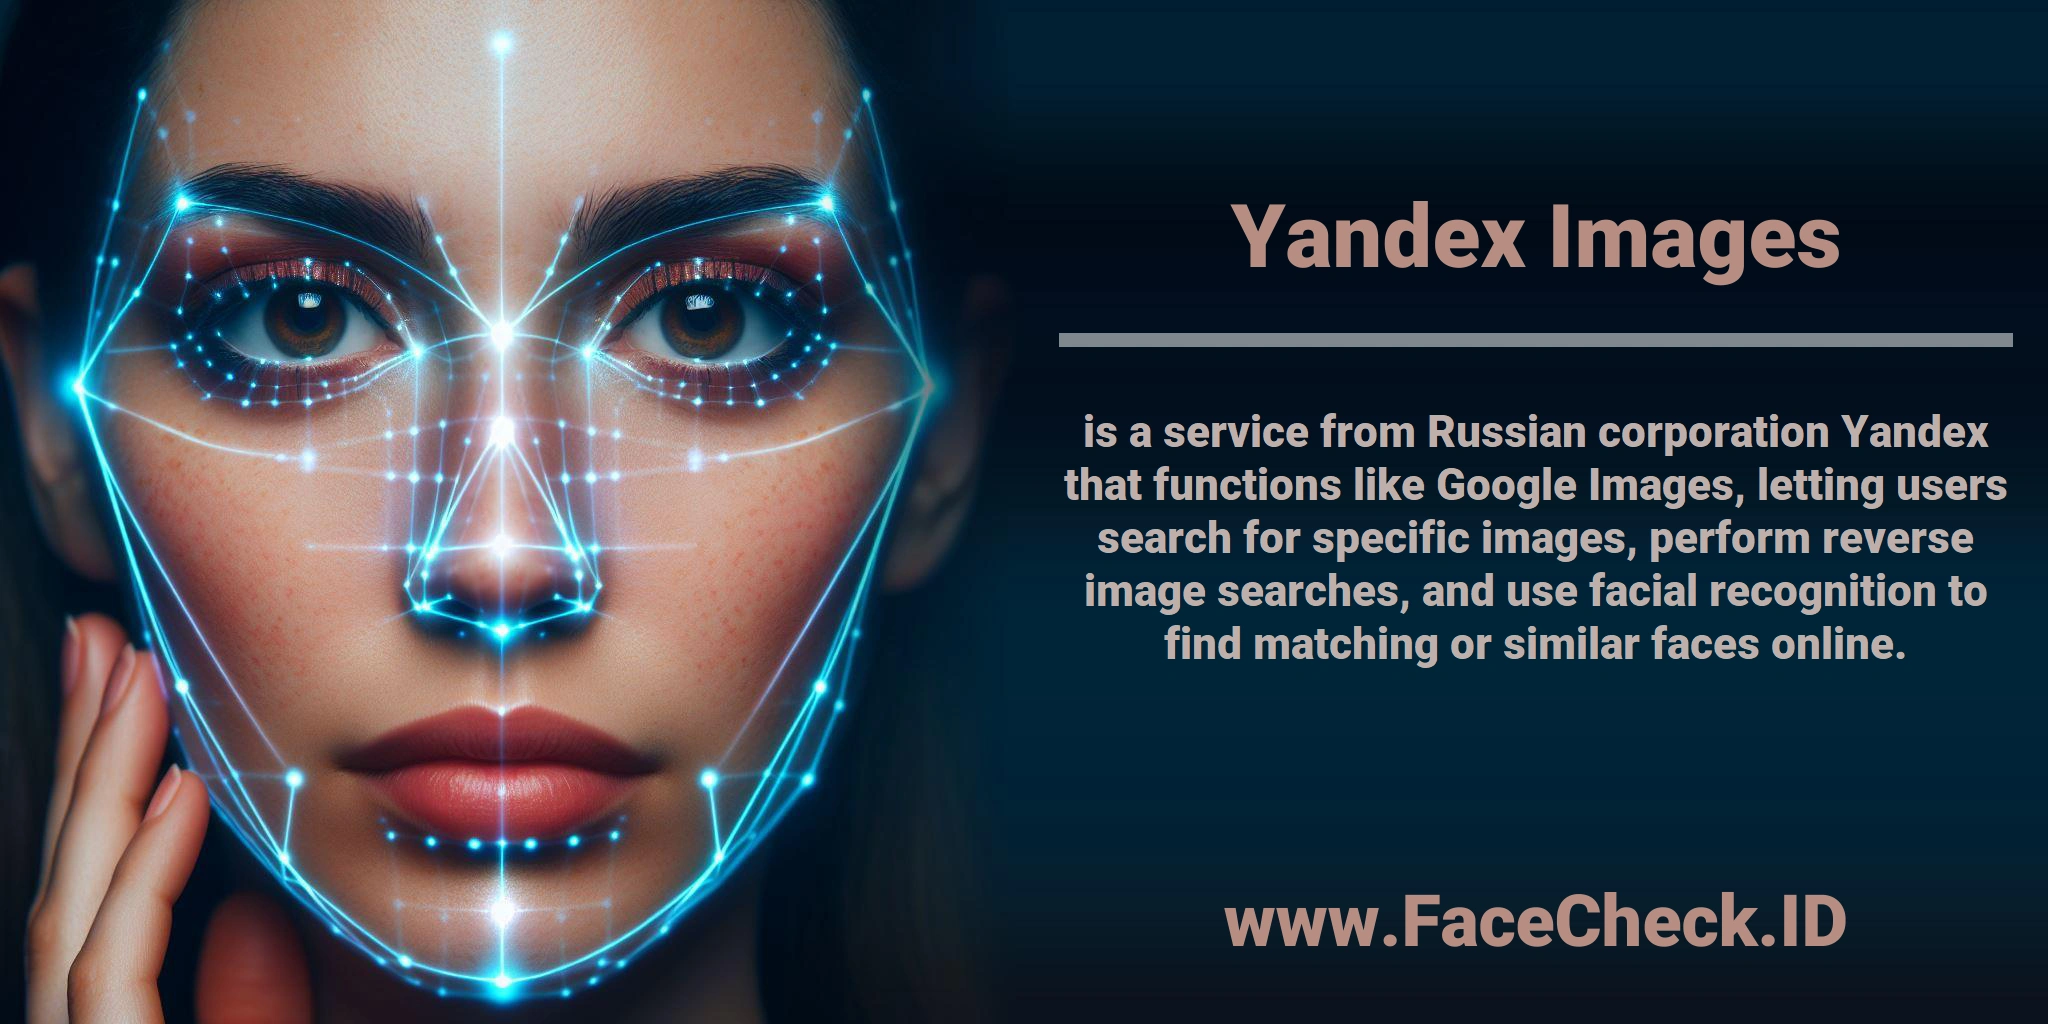 <b>Yandex Images</b> is a service from Russian corporation Yandex that functions like Google Images, letting users search for specific images, perform reverse image searches, and use facial recognition to find matching or similar faces online.